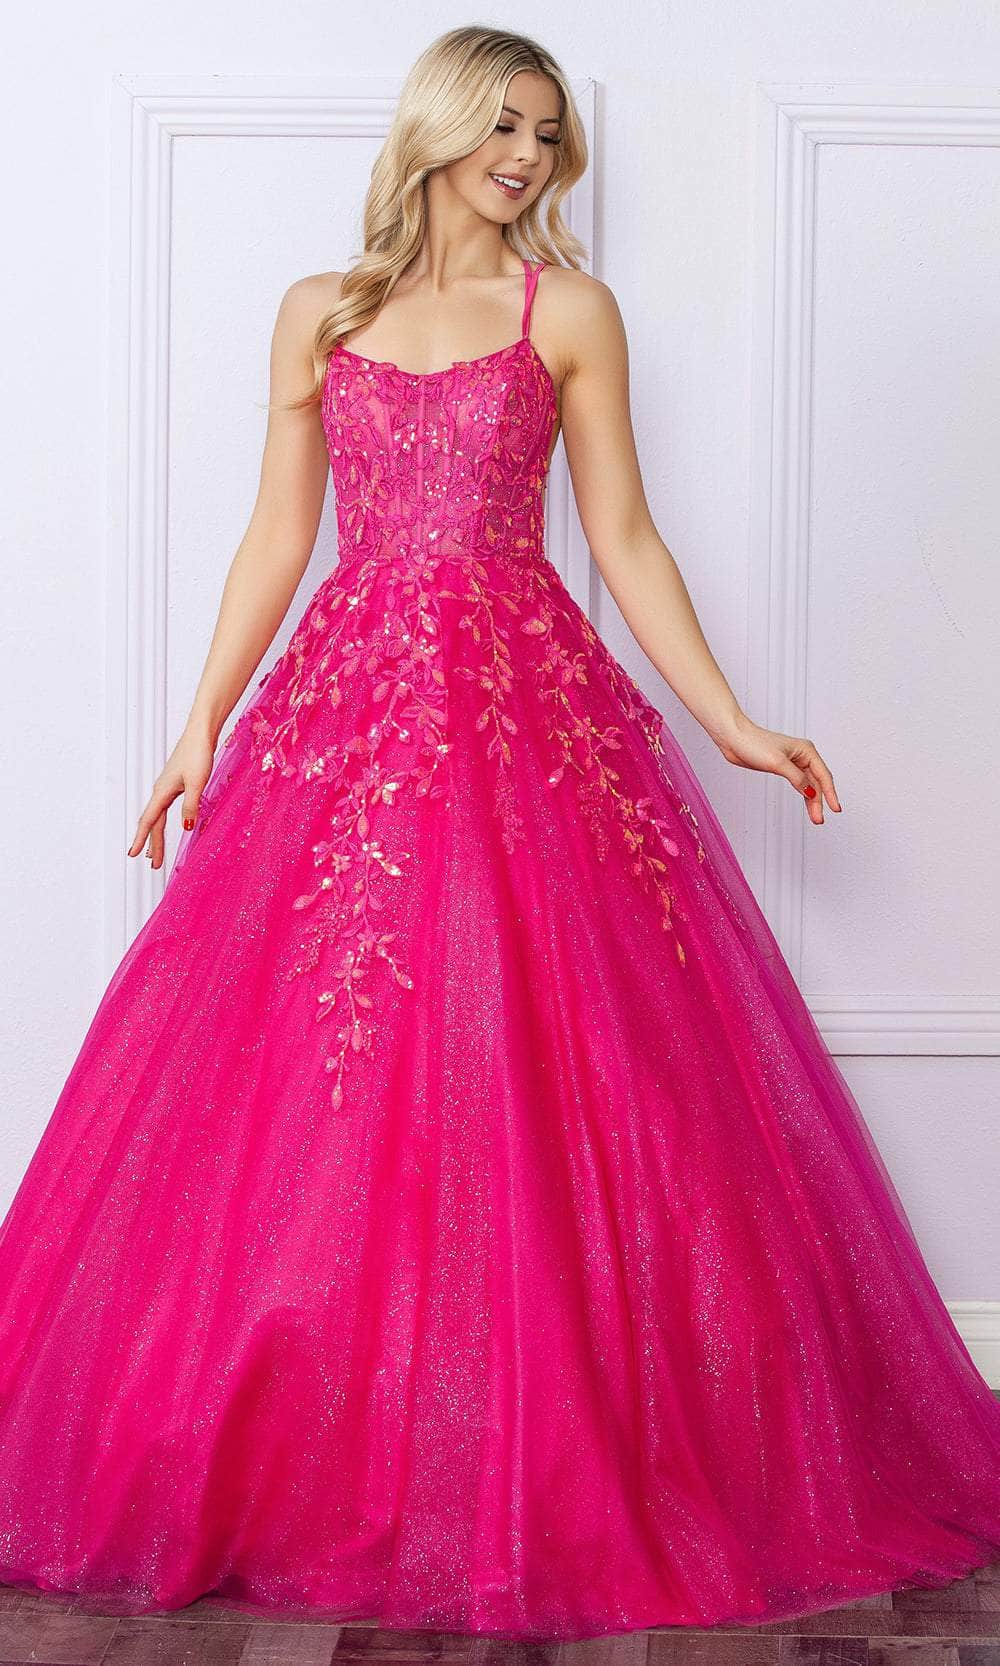 Nox Anabel H1271 - Sweetheart Floral Ballgown Special Occasion Dresses 